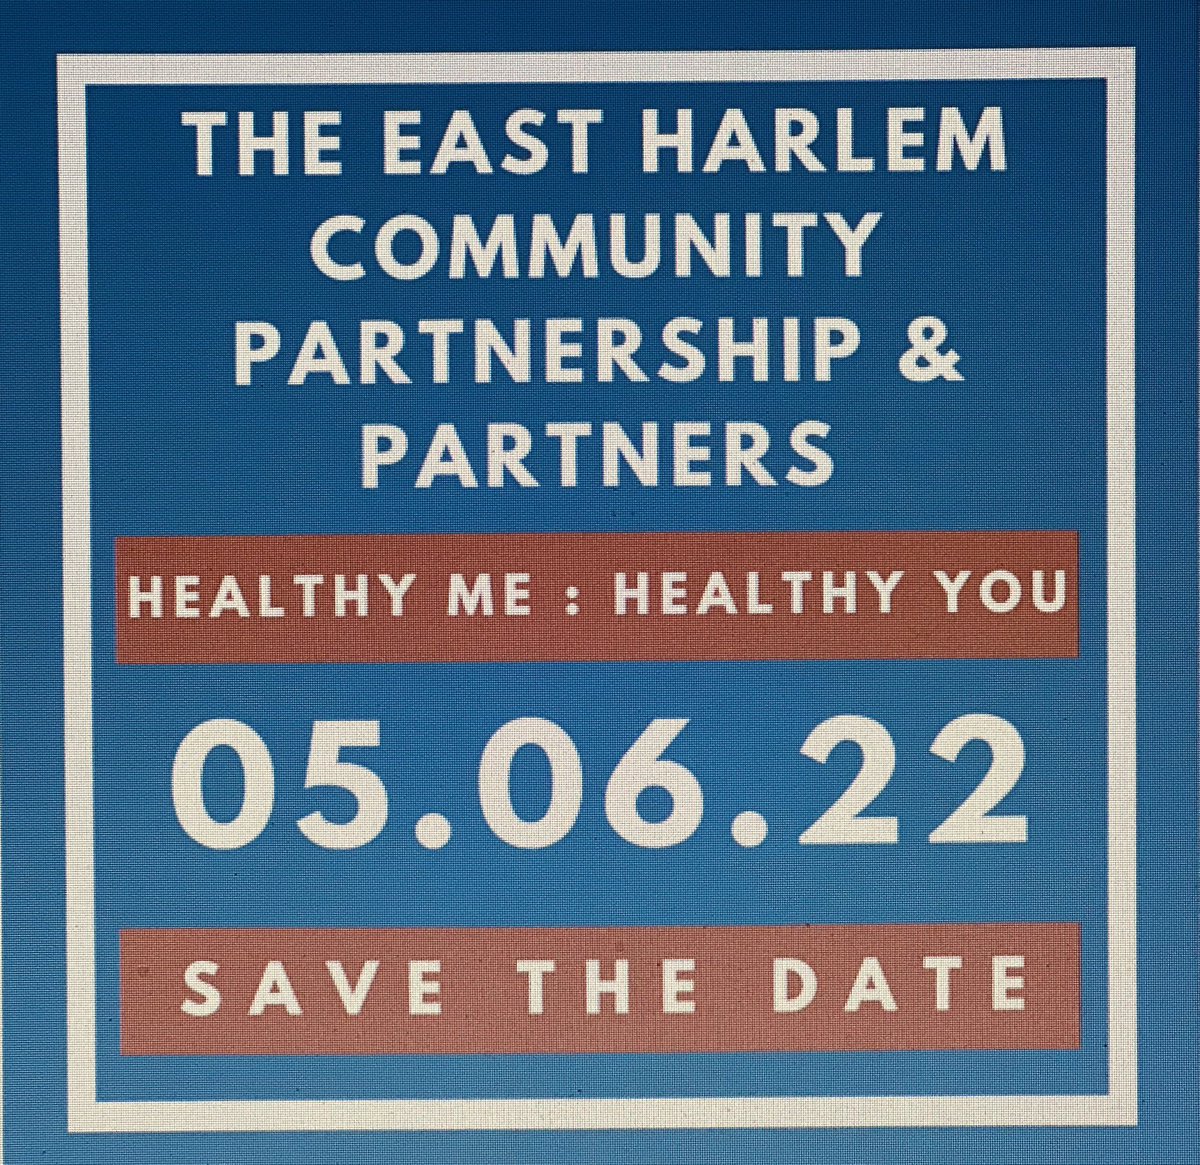 Join our “Healthy ME - Healthy YOU” outdoor #health fair on Friday, May 6! Community Garden: 237 East 104 Street. 10 am - 2 pm. Lots of info, blood pressure & other tests. KN95 masks. Singing bowls for relaxation & healthy snacks & giveaways! #EastHarlem @unionsettlement